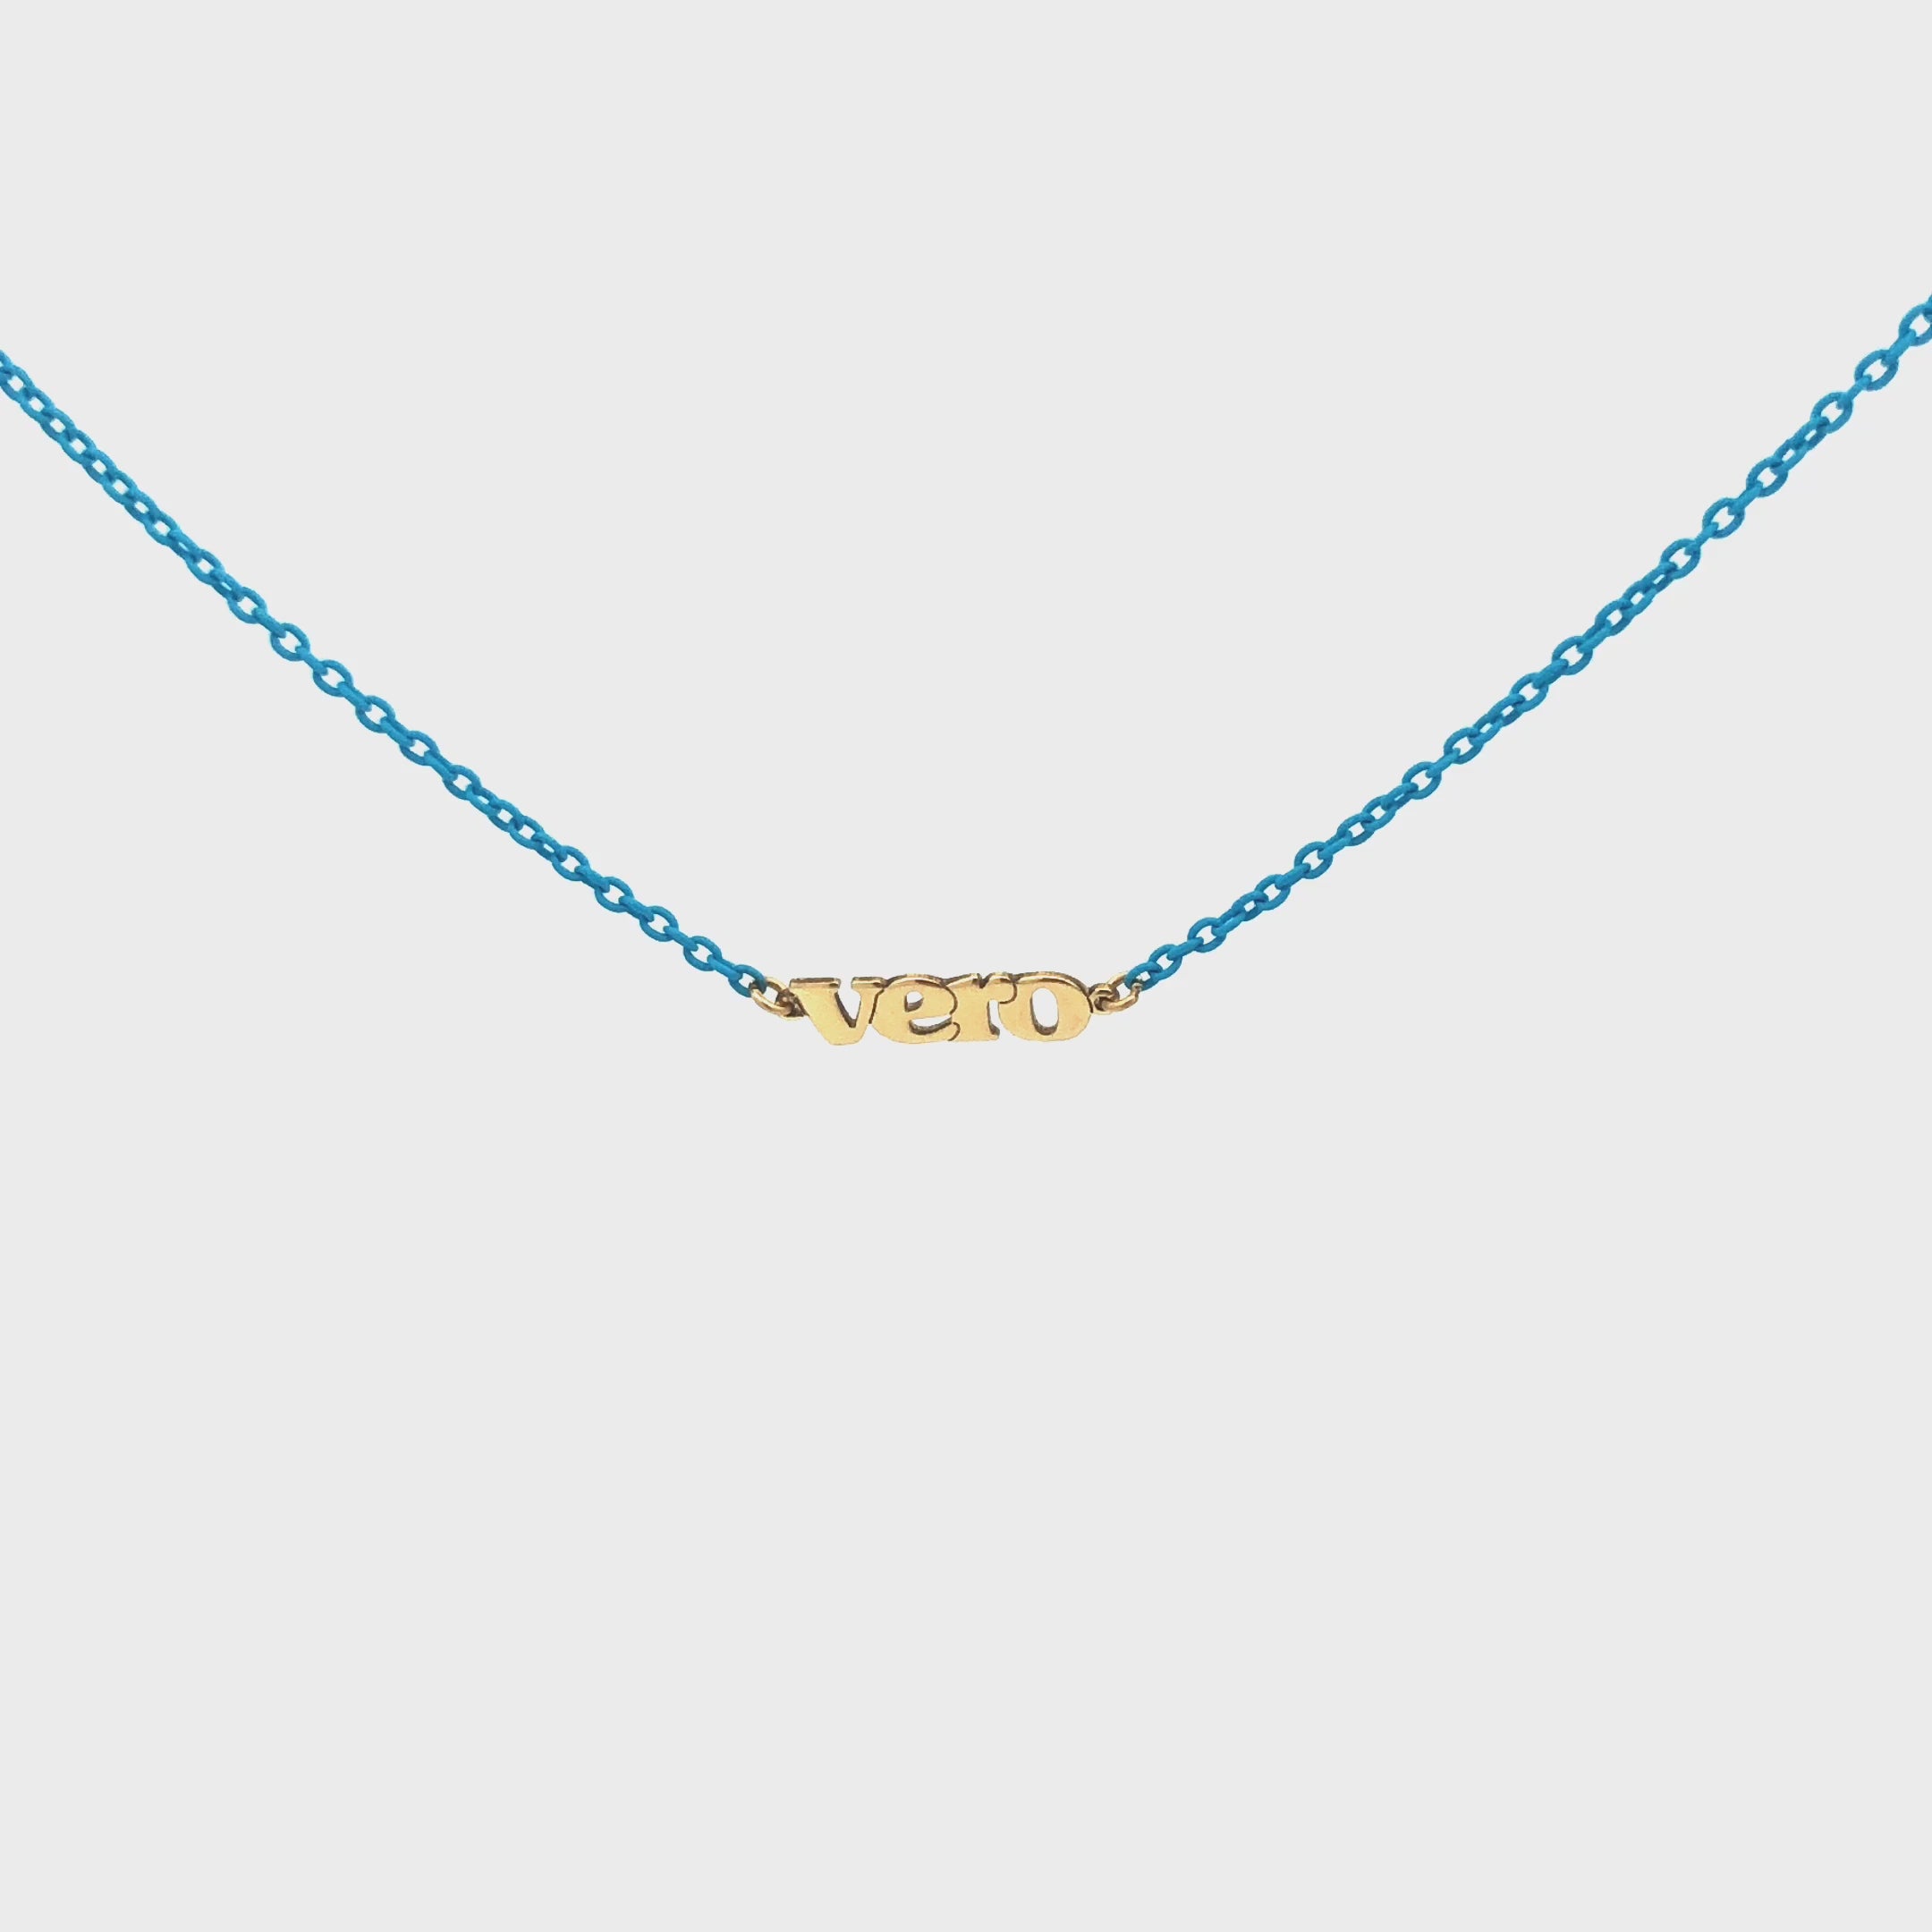 Chokers - Customizable Golden Mate choker colored chain – ORO18KT - thumbnail - video - 1 | Rue des Mille